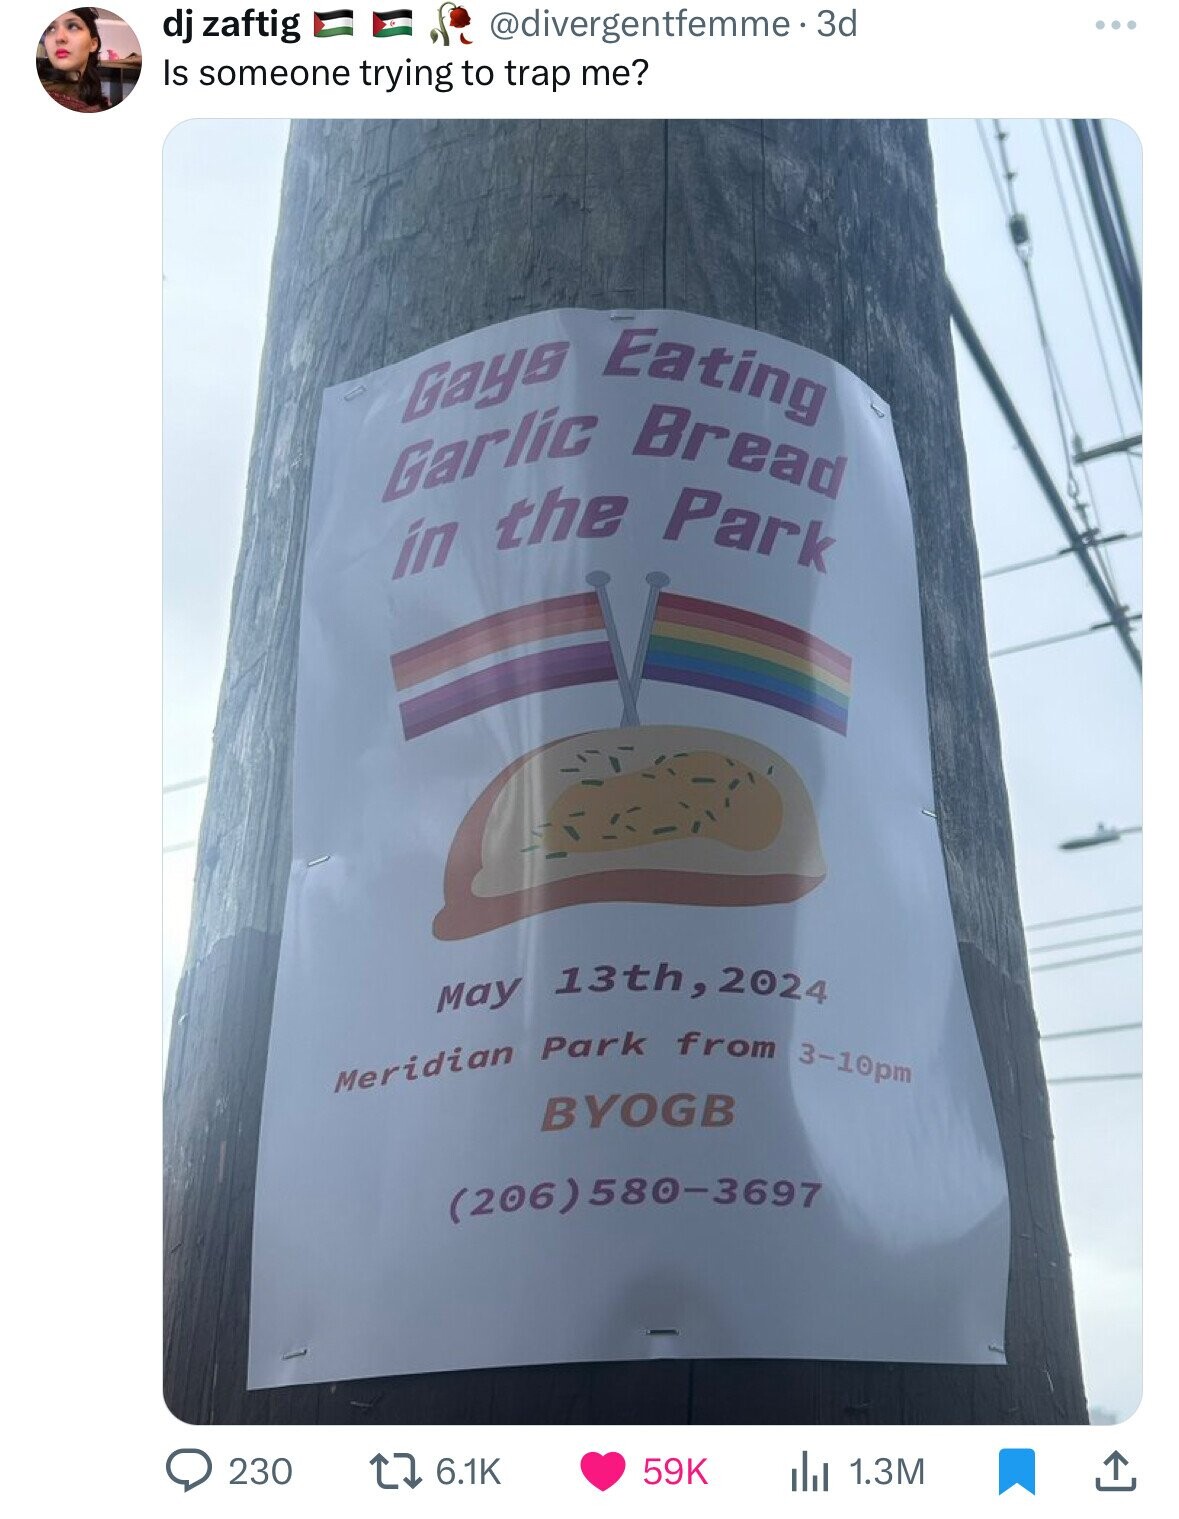 banner - dj zaftig . 3d Is someone trying to trap me? Gaye Garlic Eating Bread in the Park May 13th, 2024 Meridian Park from 310pm Byogb 206 5803697 230 1 59K ili 1.3M